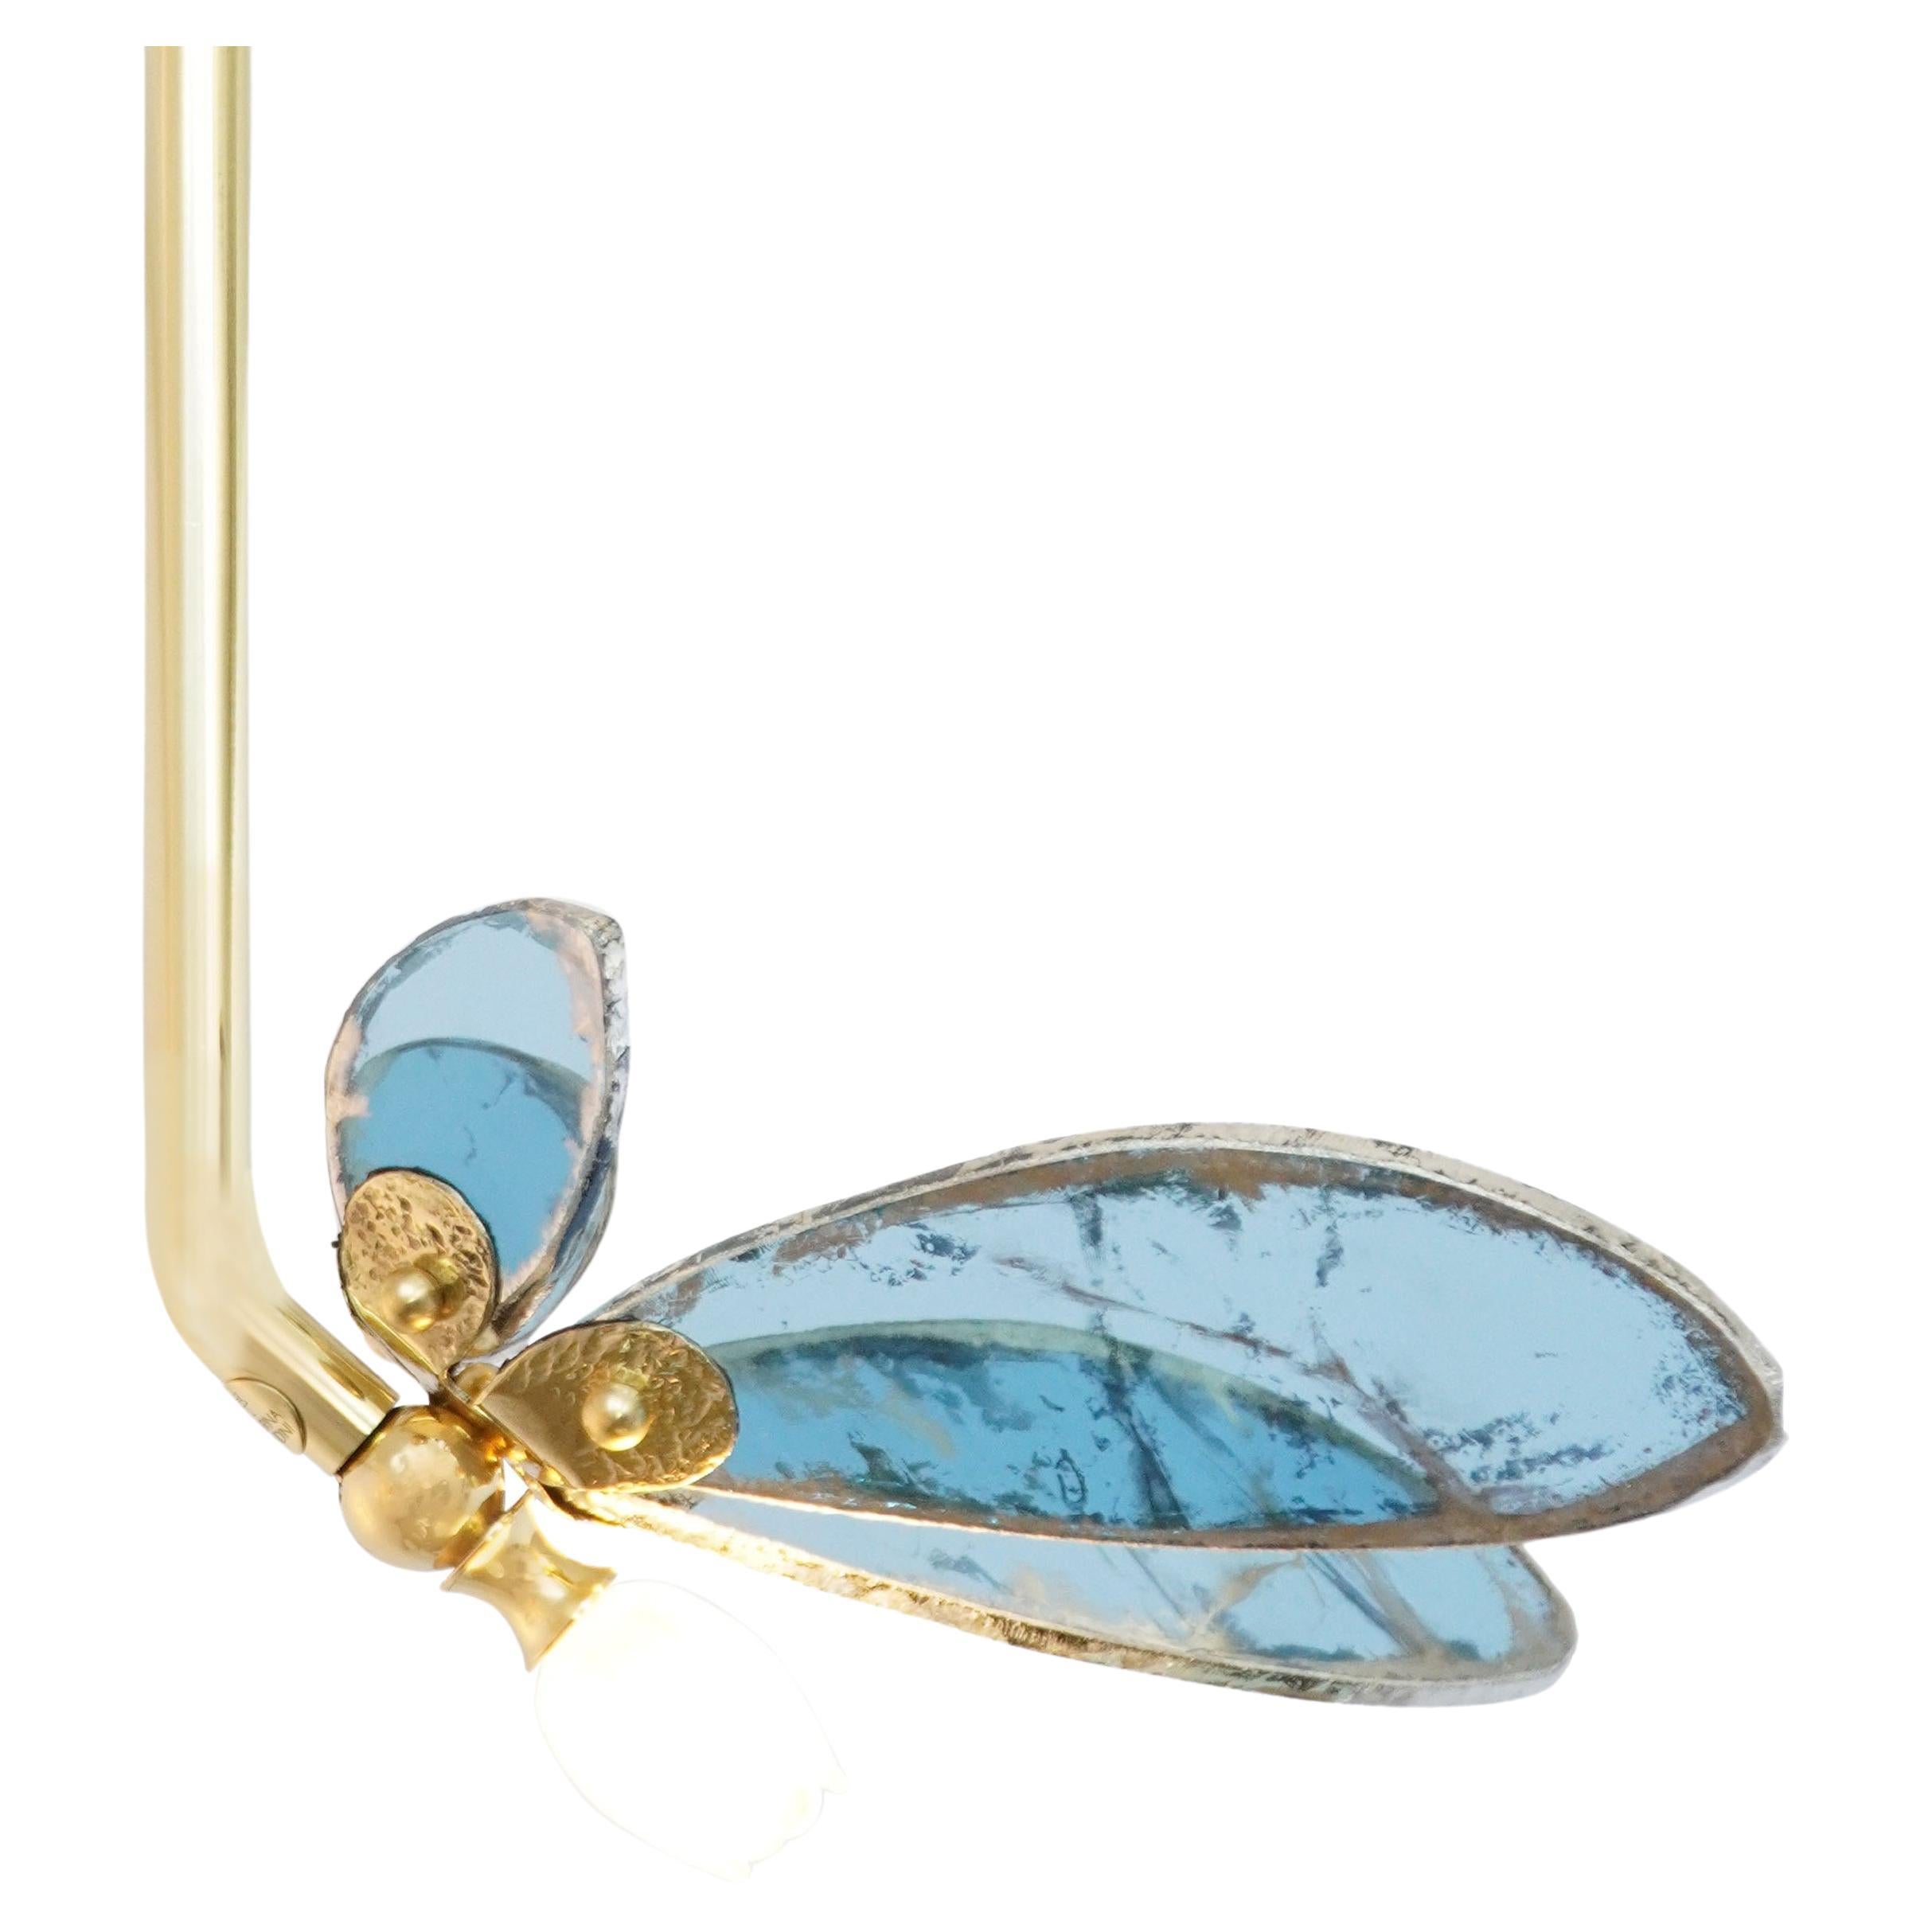 "Trilly" Contemporary Pendant Lamp Light Blue Silvered Art Glass, Brass Body For Sale